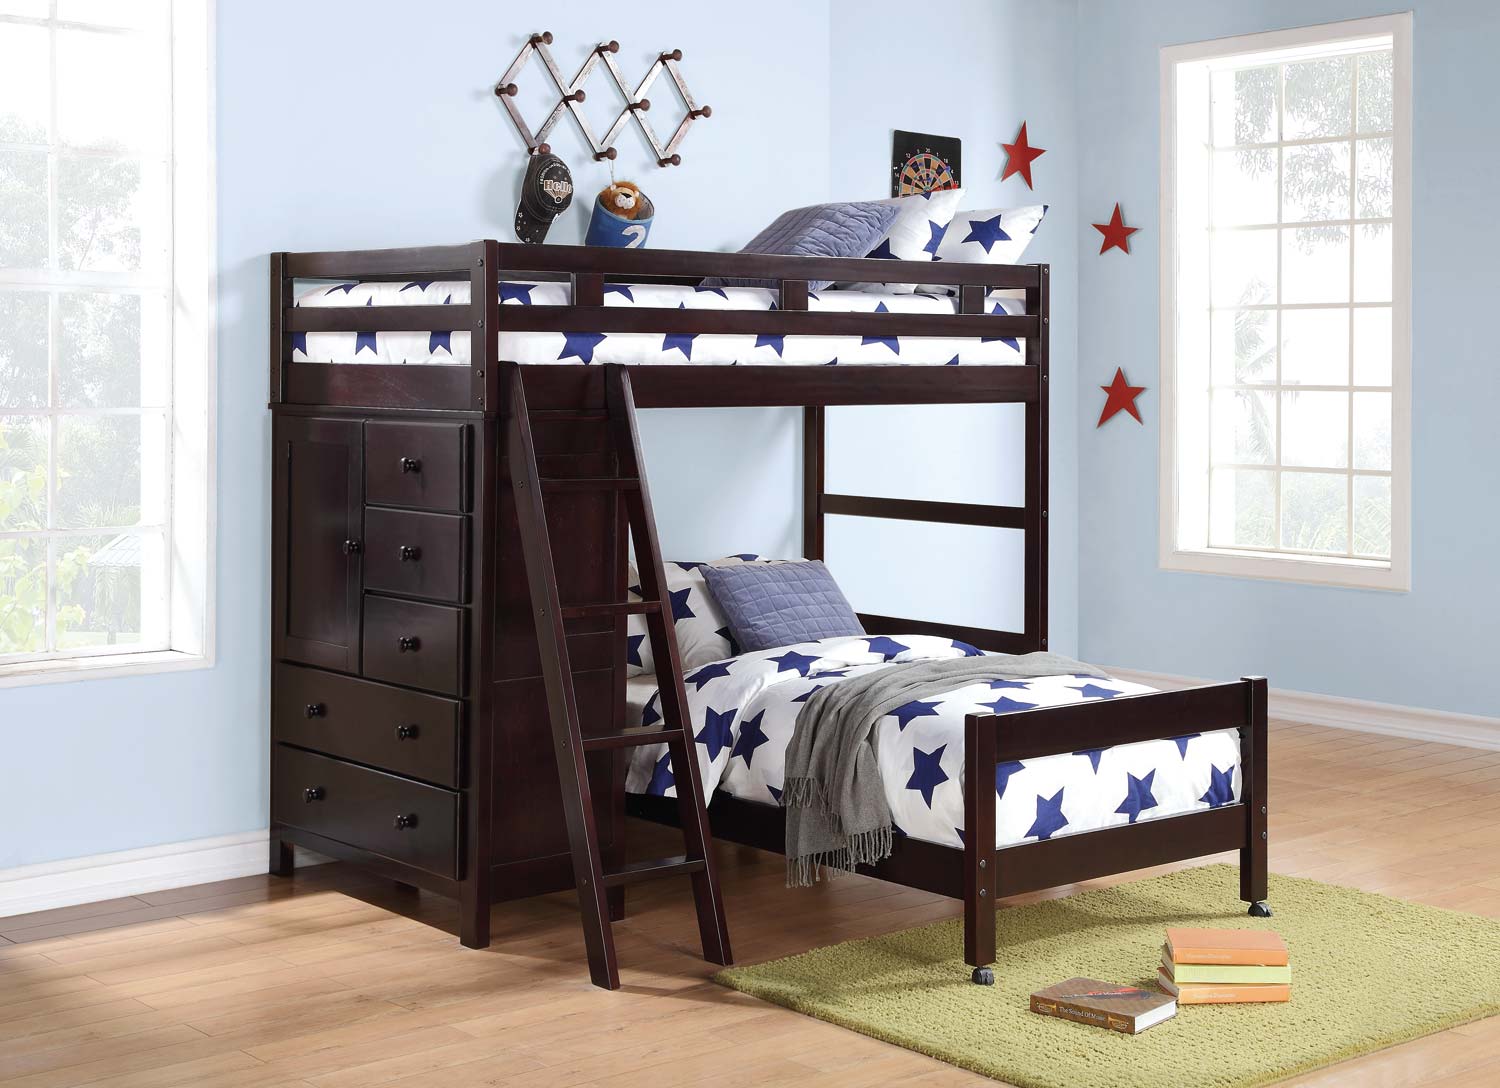 Homelegance Tops Twin/Twin Loft Bed with Storages - Dark Cherry